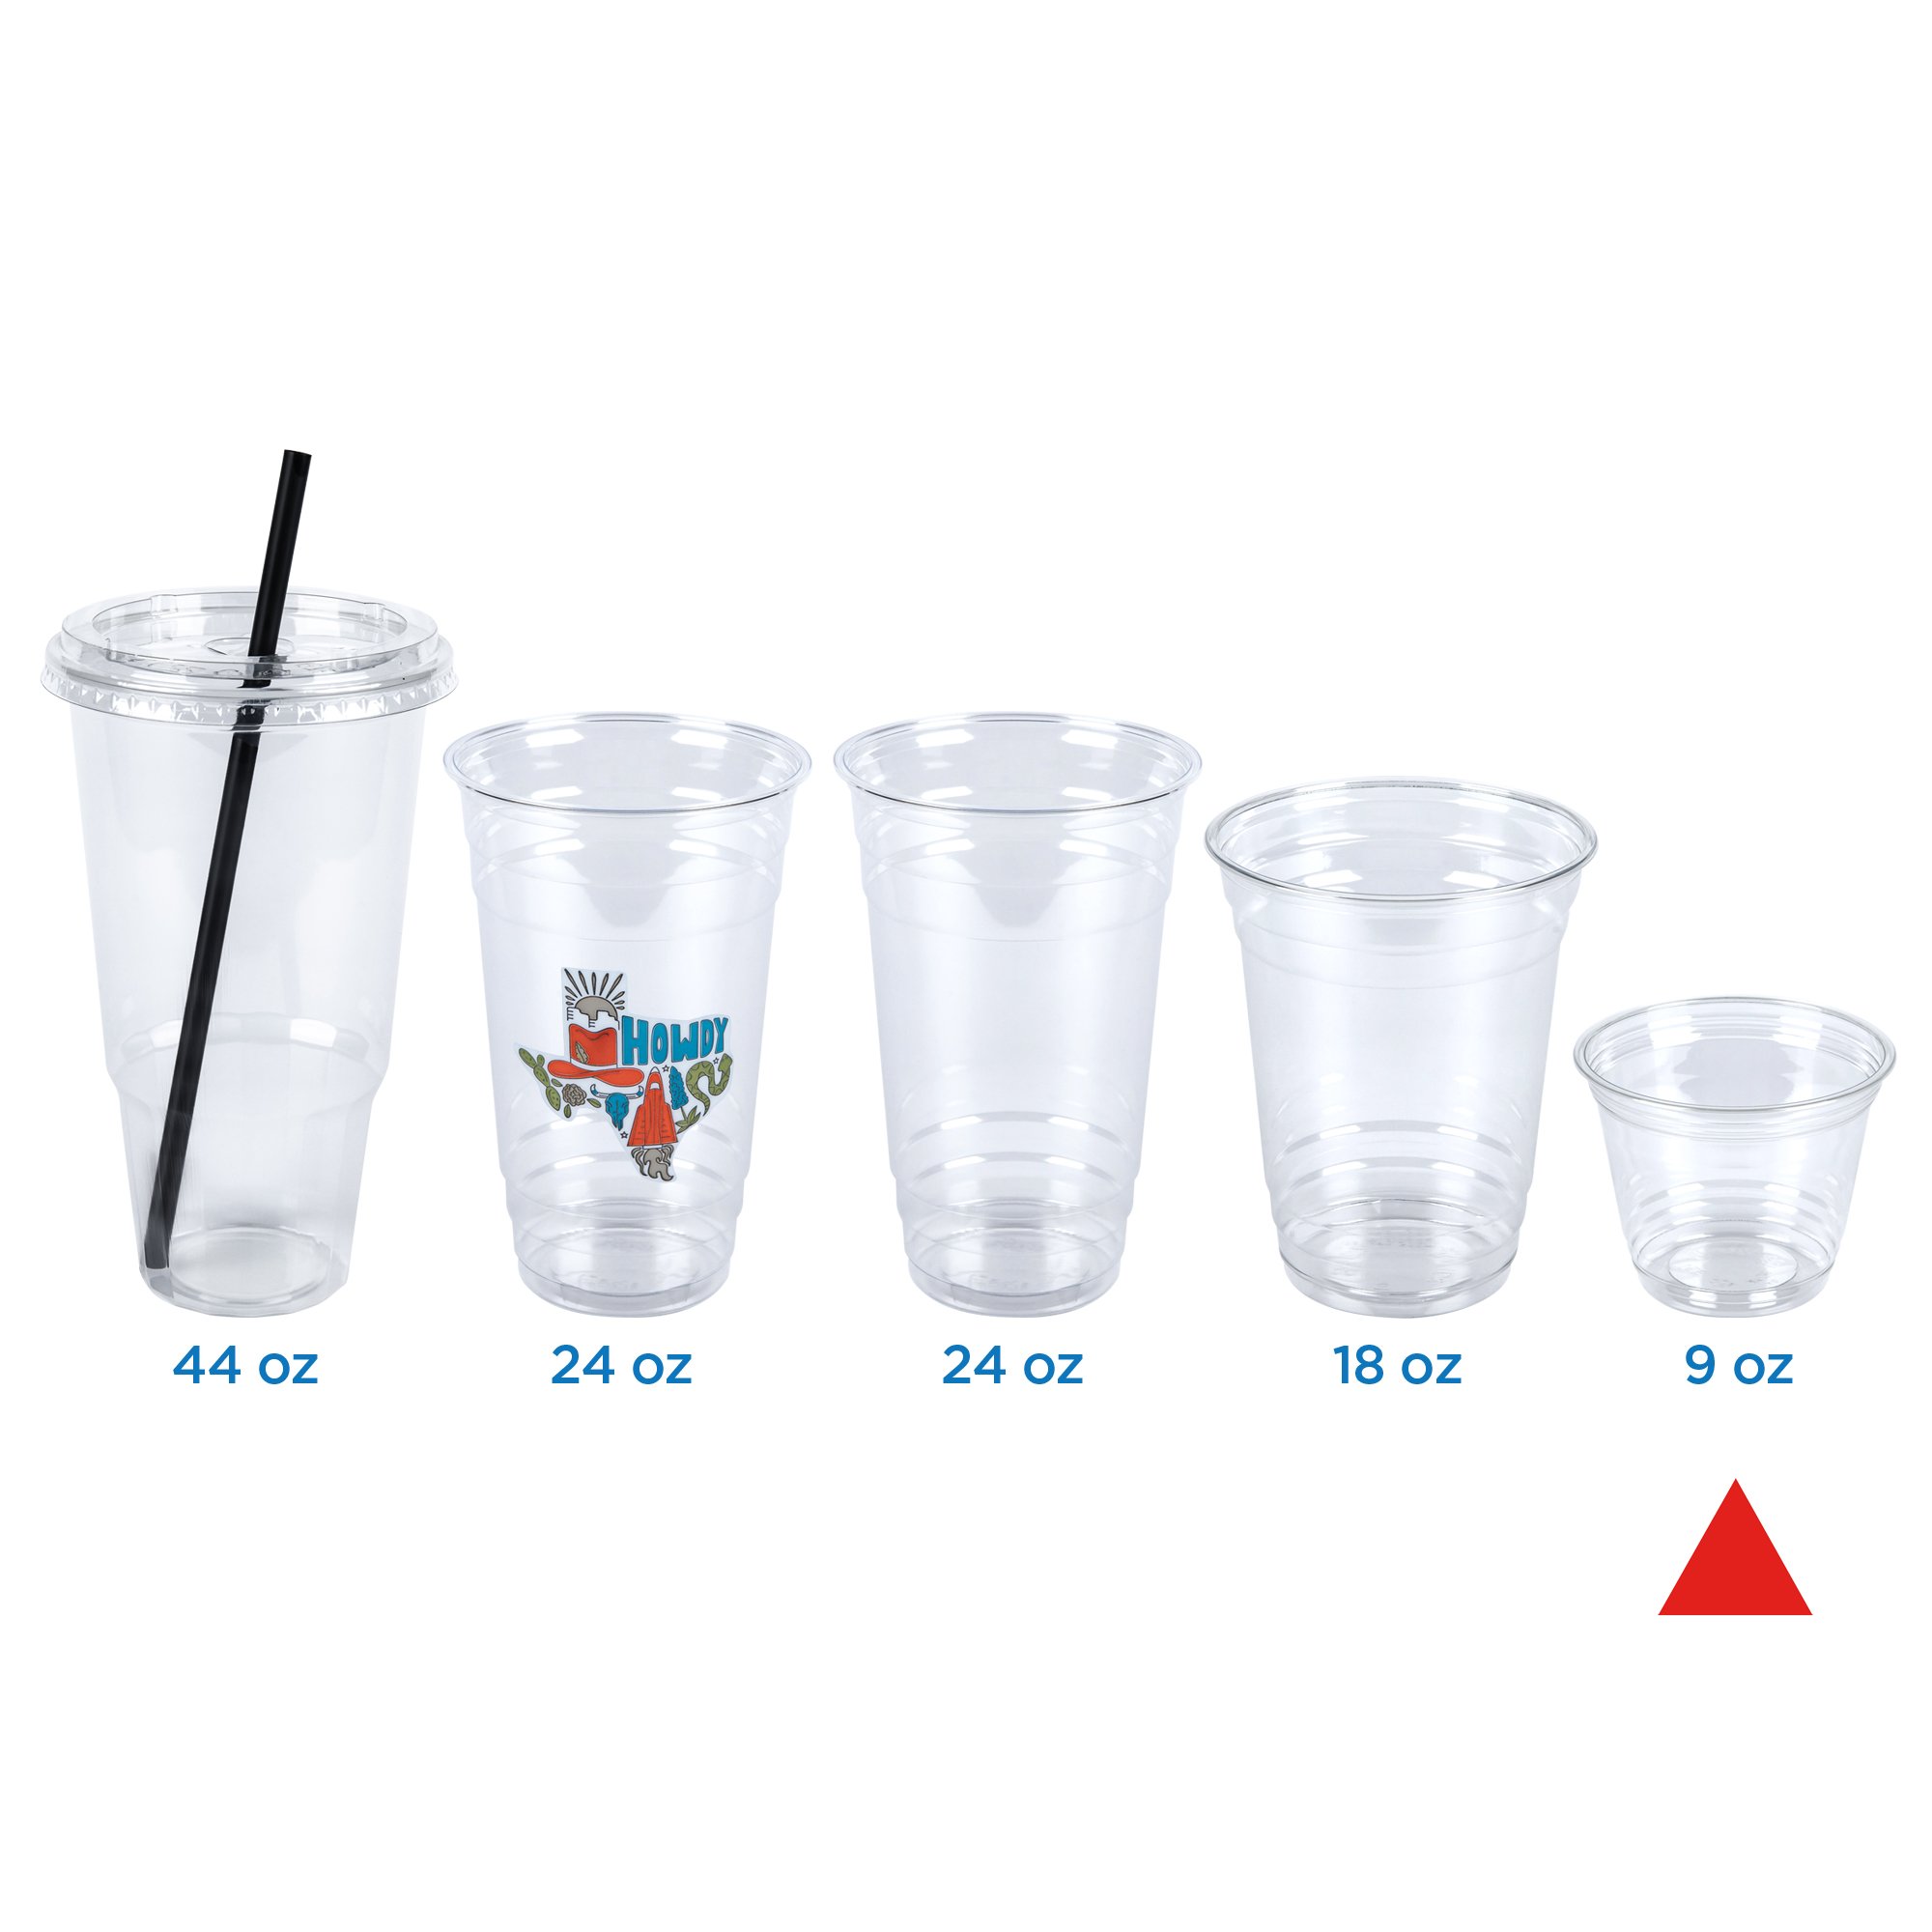 Destination Holiday Merry Christmas Plastic Cups with Lids - Shop Party  Decor at H-E-B